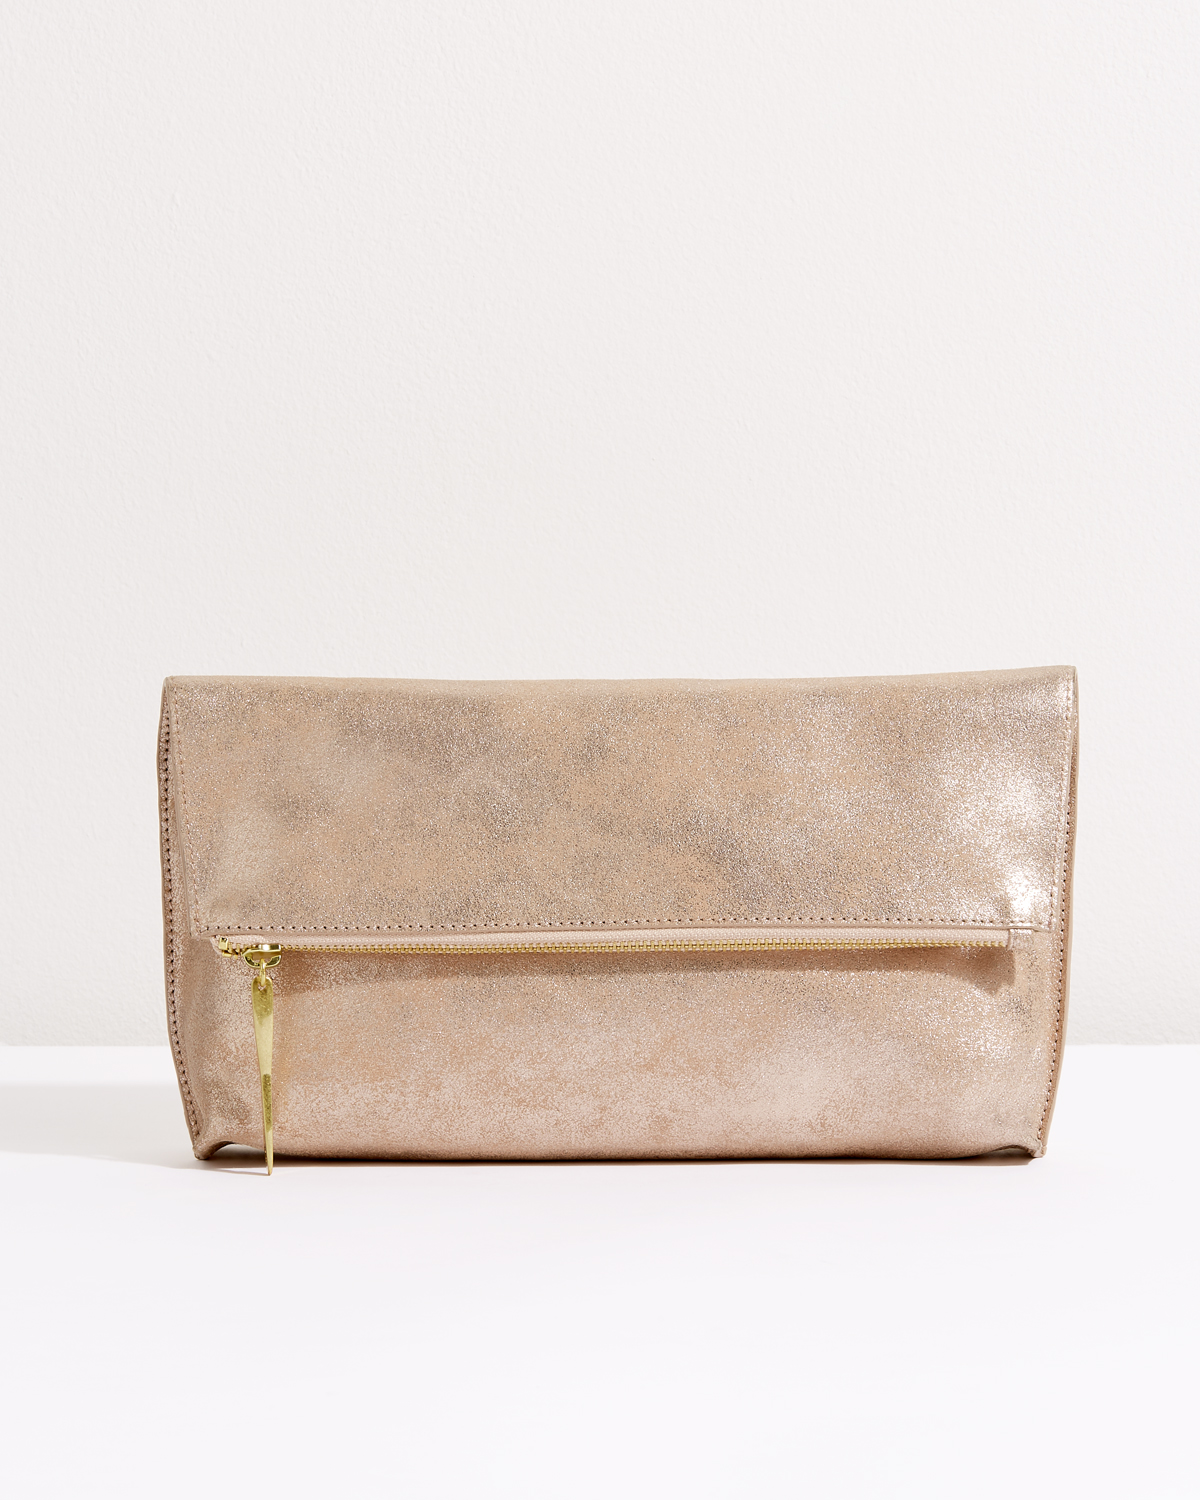 Alexis Fold Over Clutch £80